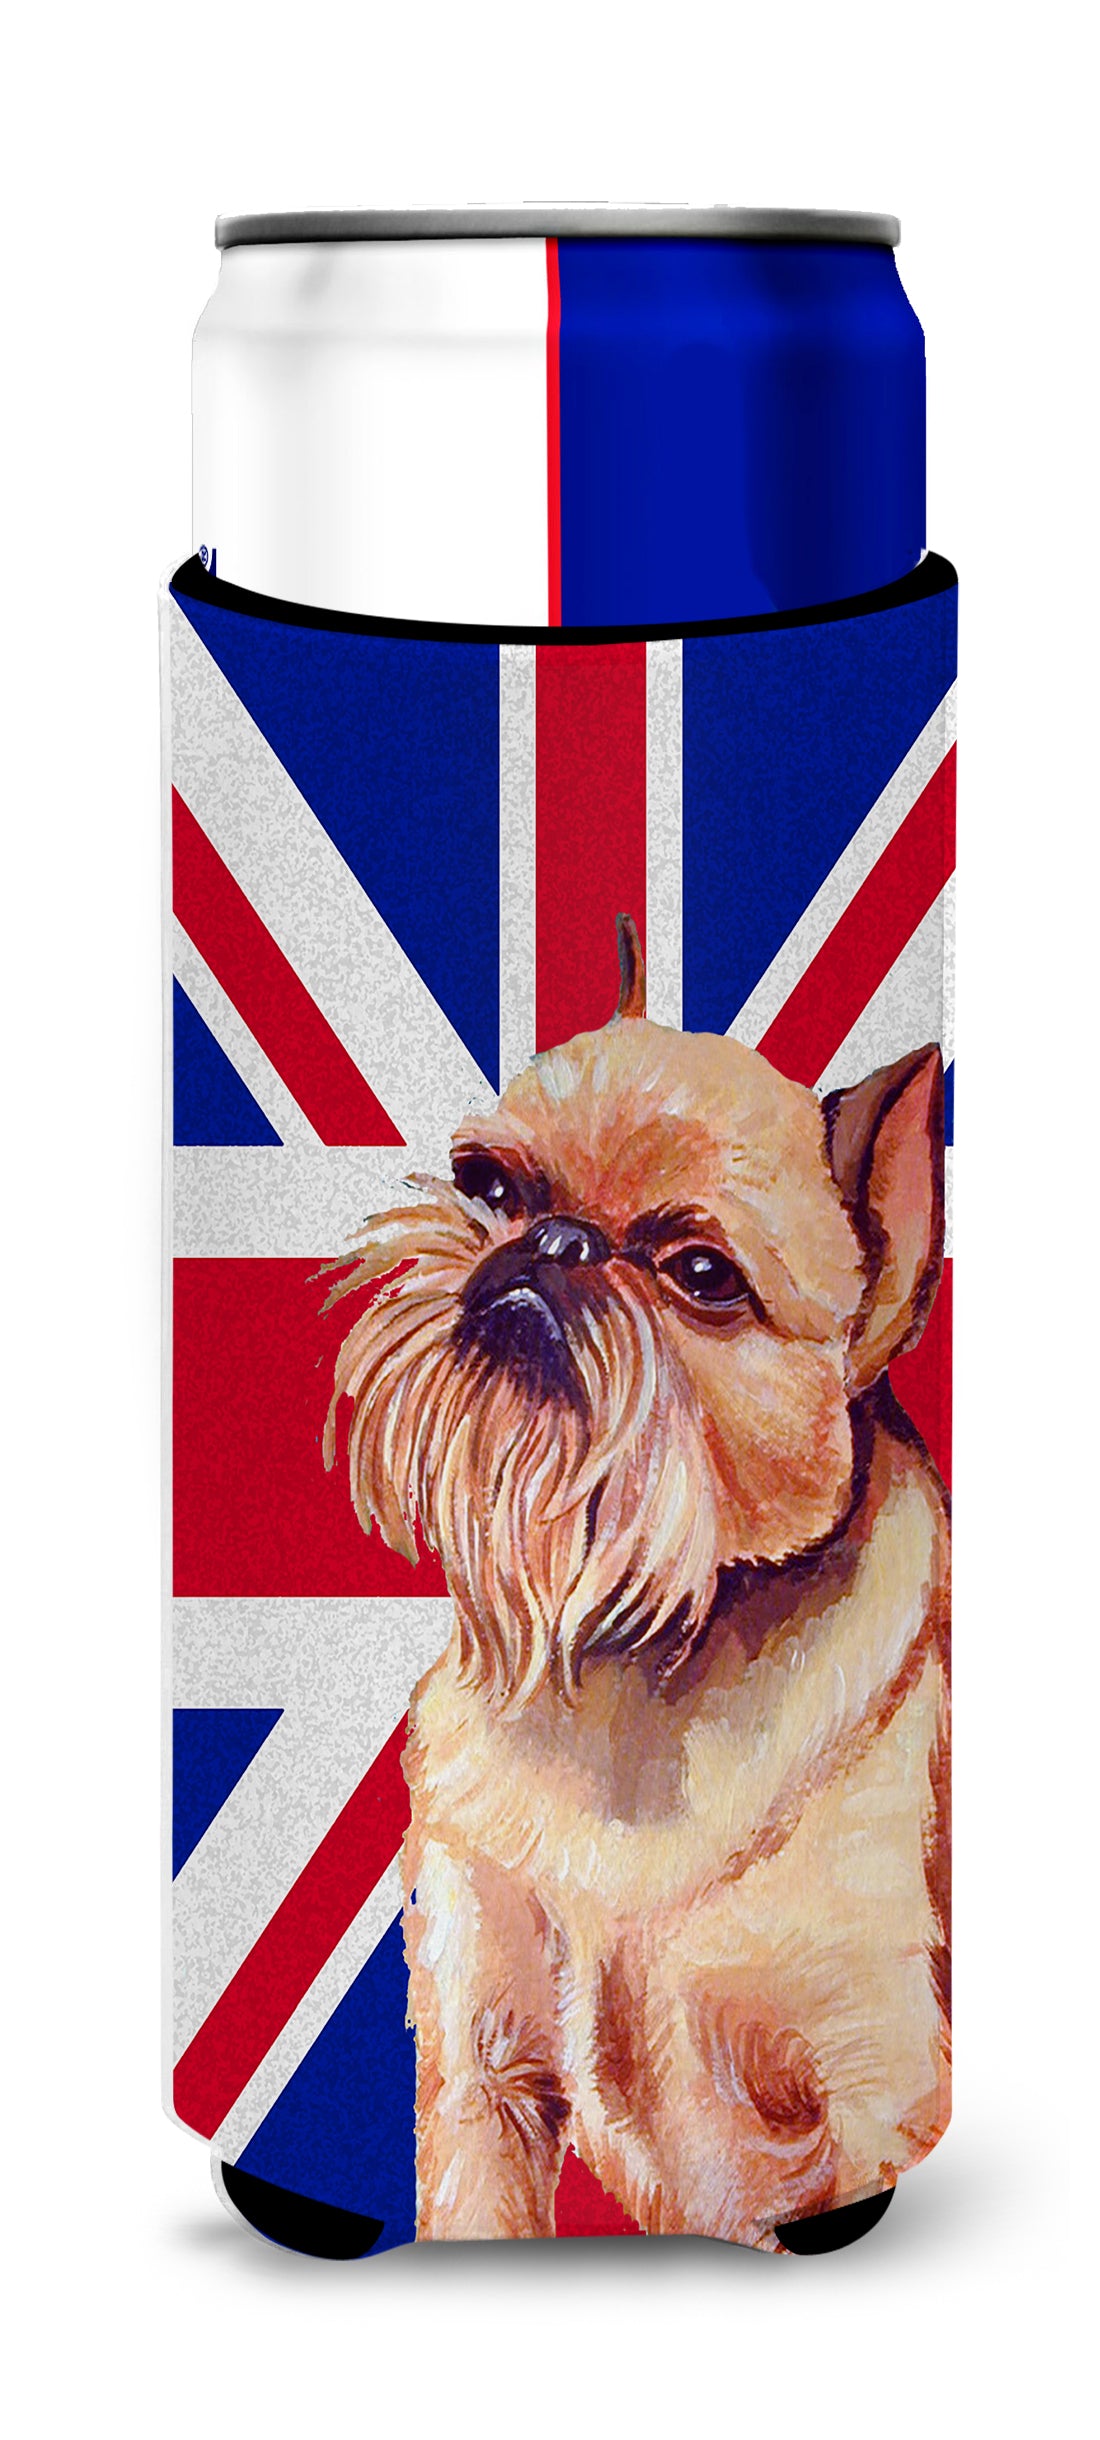 Brussels Griffon with English Union Jack British Flag Ultra Beverage Insulators for slim cans LH9466MUK